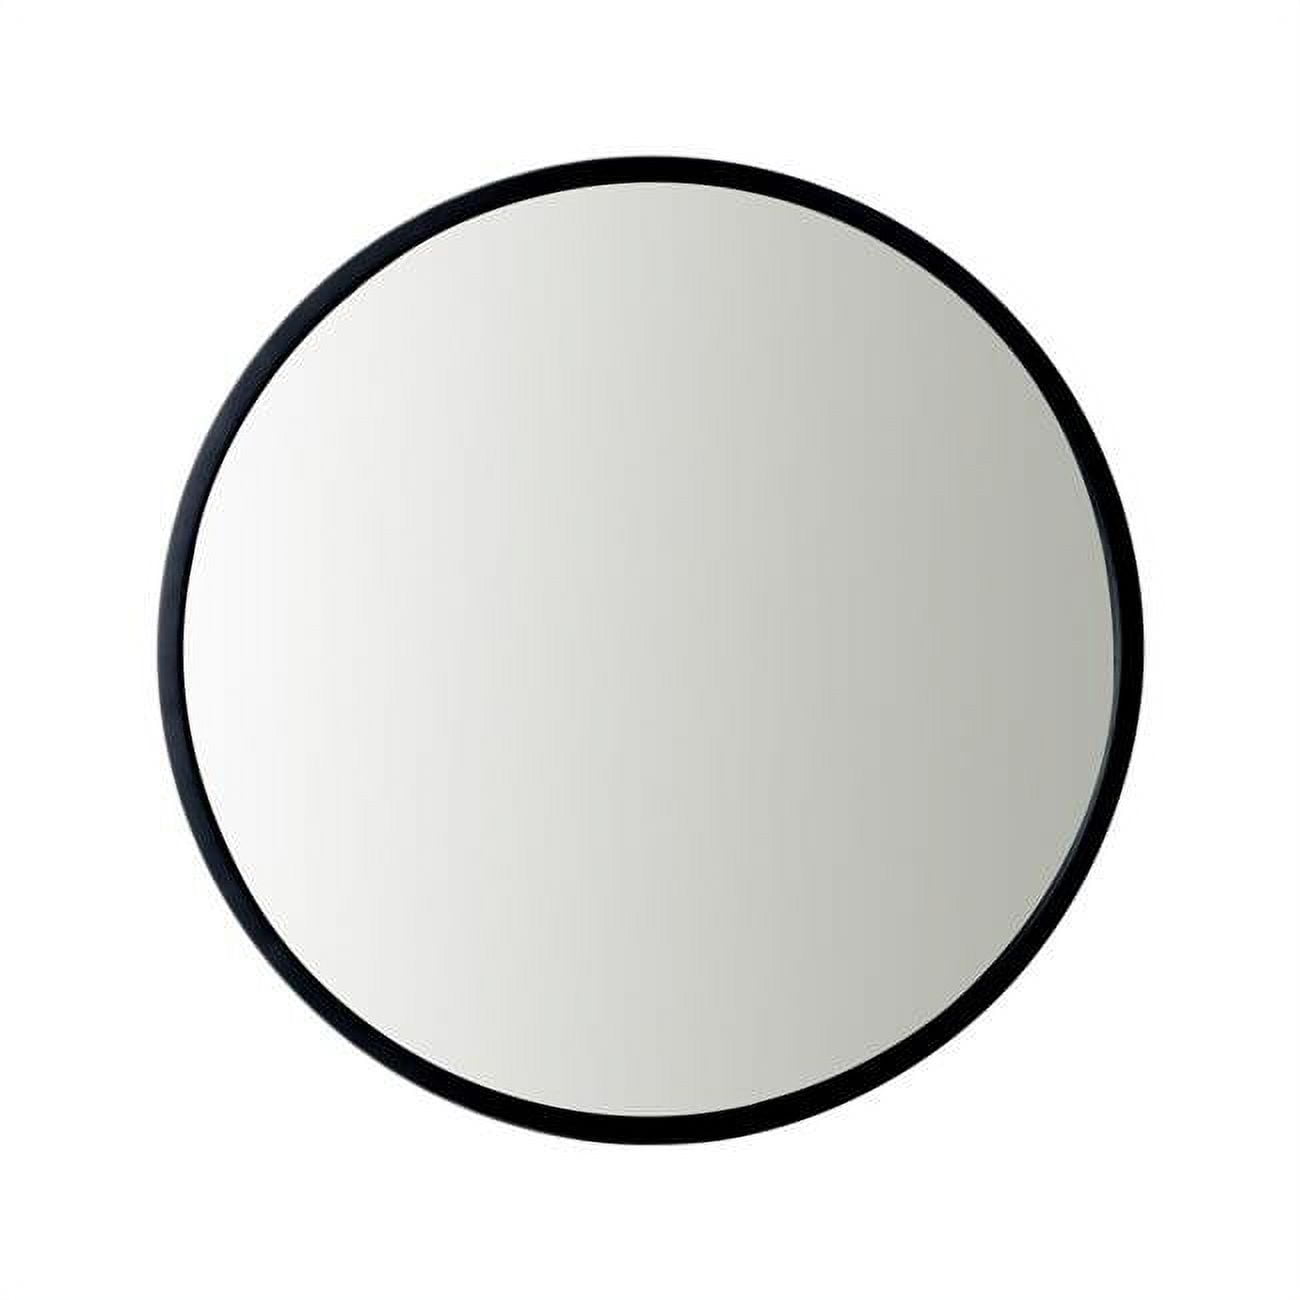 2-Pack 30 inch Round Black Framed Mirrors, Round Mirrors with Metal Frame and Pure Silver Backing, Circle Mirrors for Wall Decor, Modern Bathroom